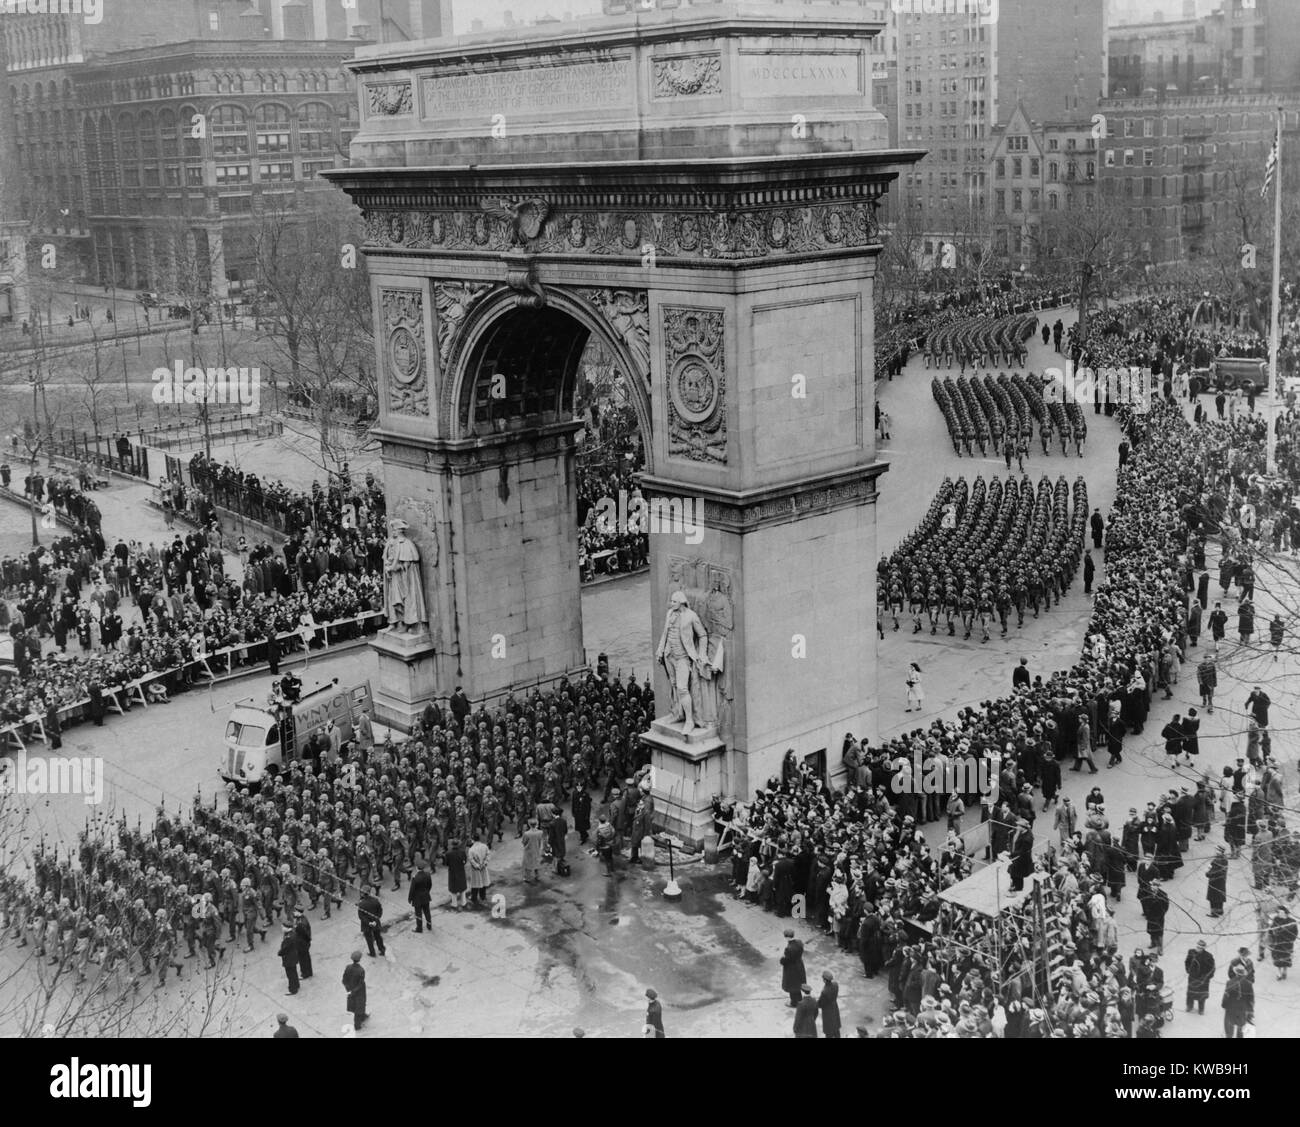 U.S. Army soldiers march through Washington Square Arch in New York City. The four mile long parade began at Washington Square Park and marched up Fifth Avenue. Jan. 12, 1946. (BSLOC 2014 13 1) Stock Photo